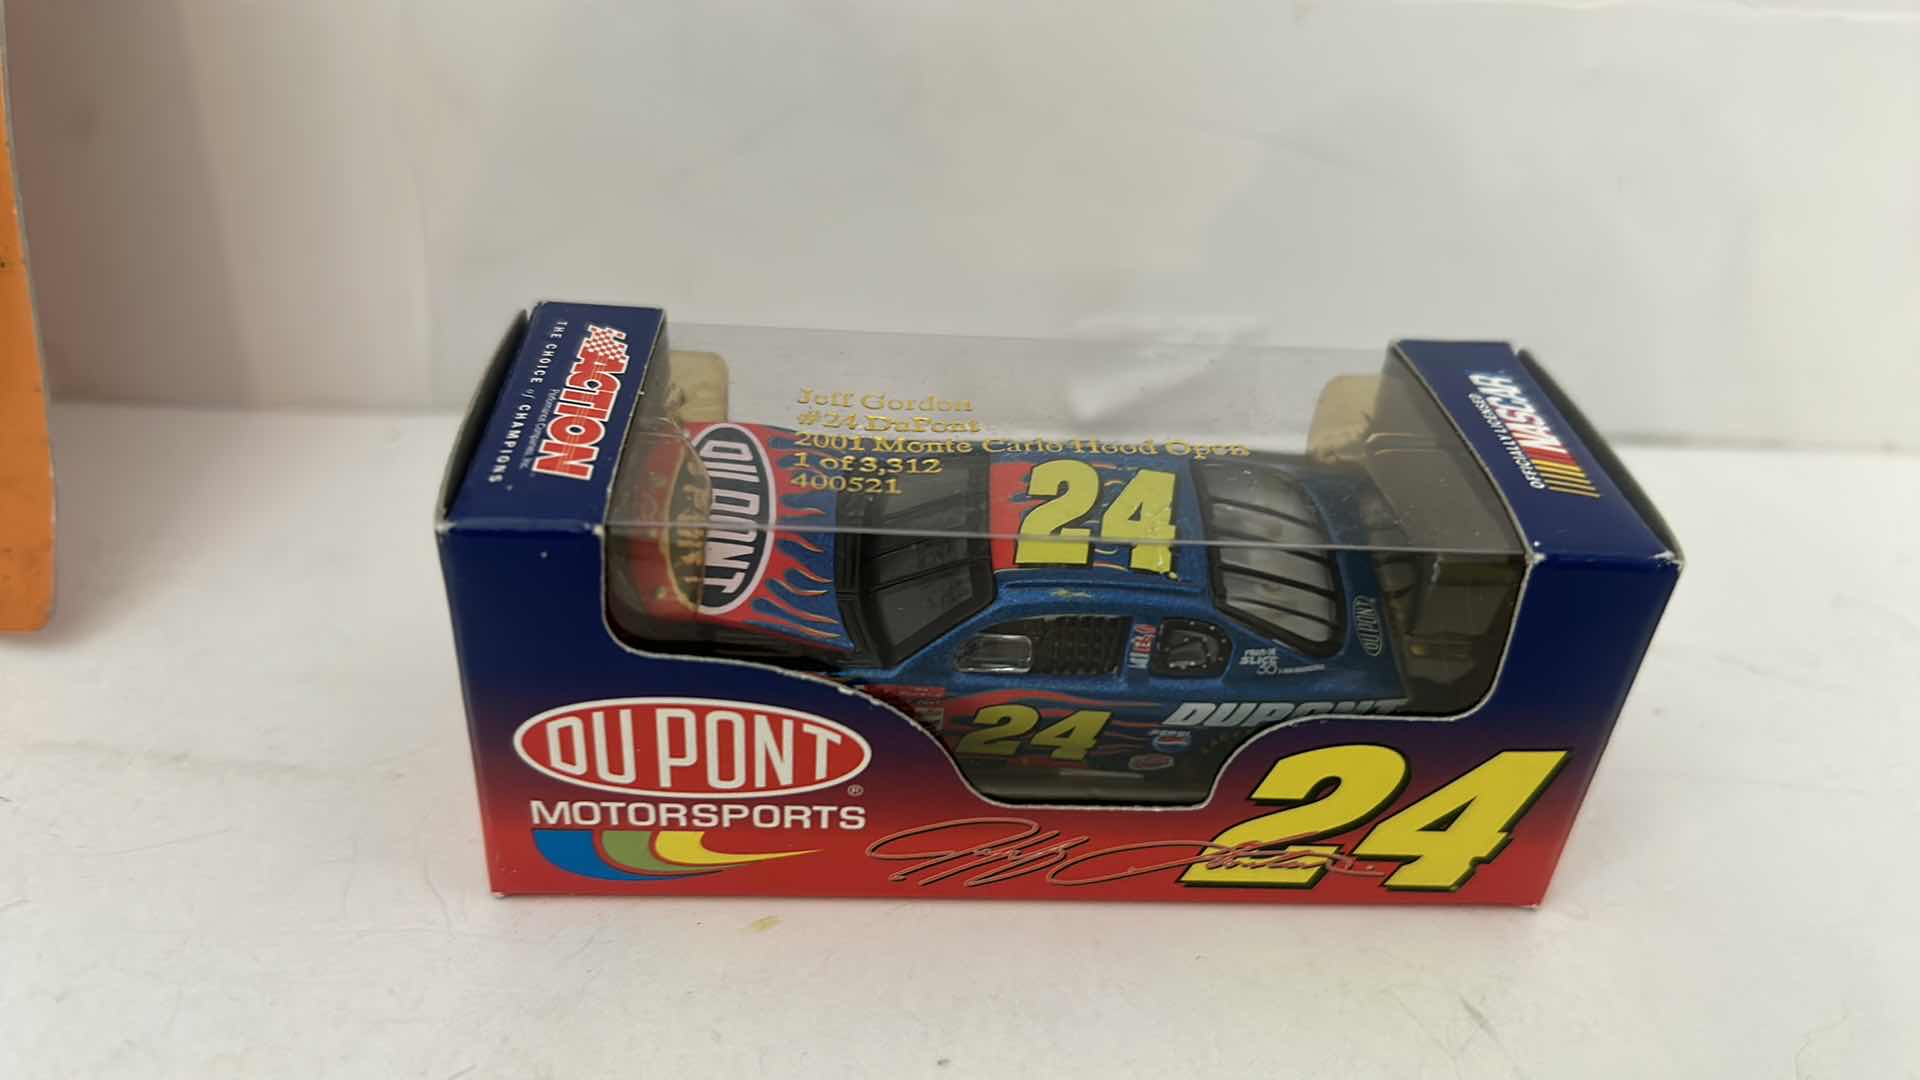 Photo 3 of 3 ACTION RACING COLLECTABLES